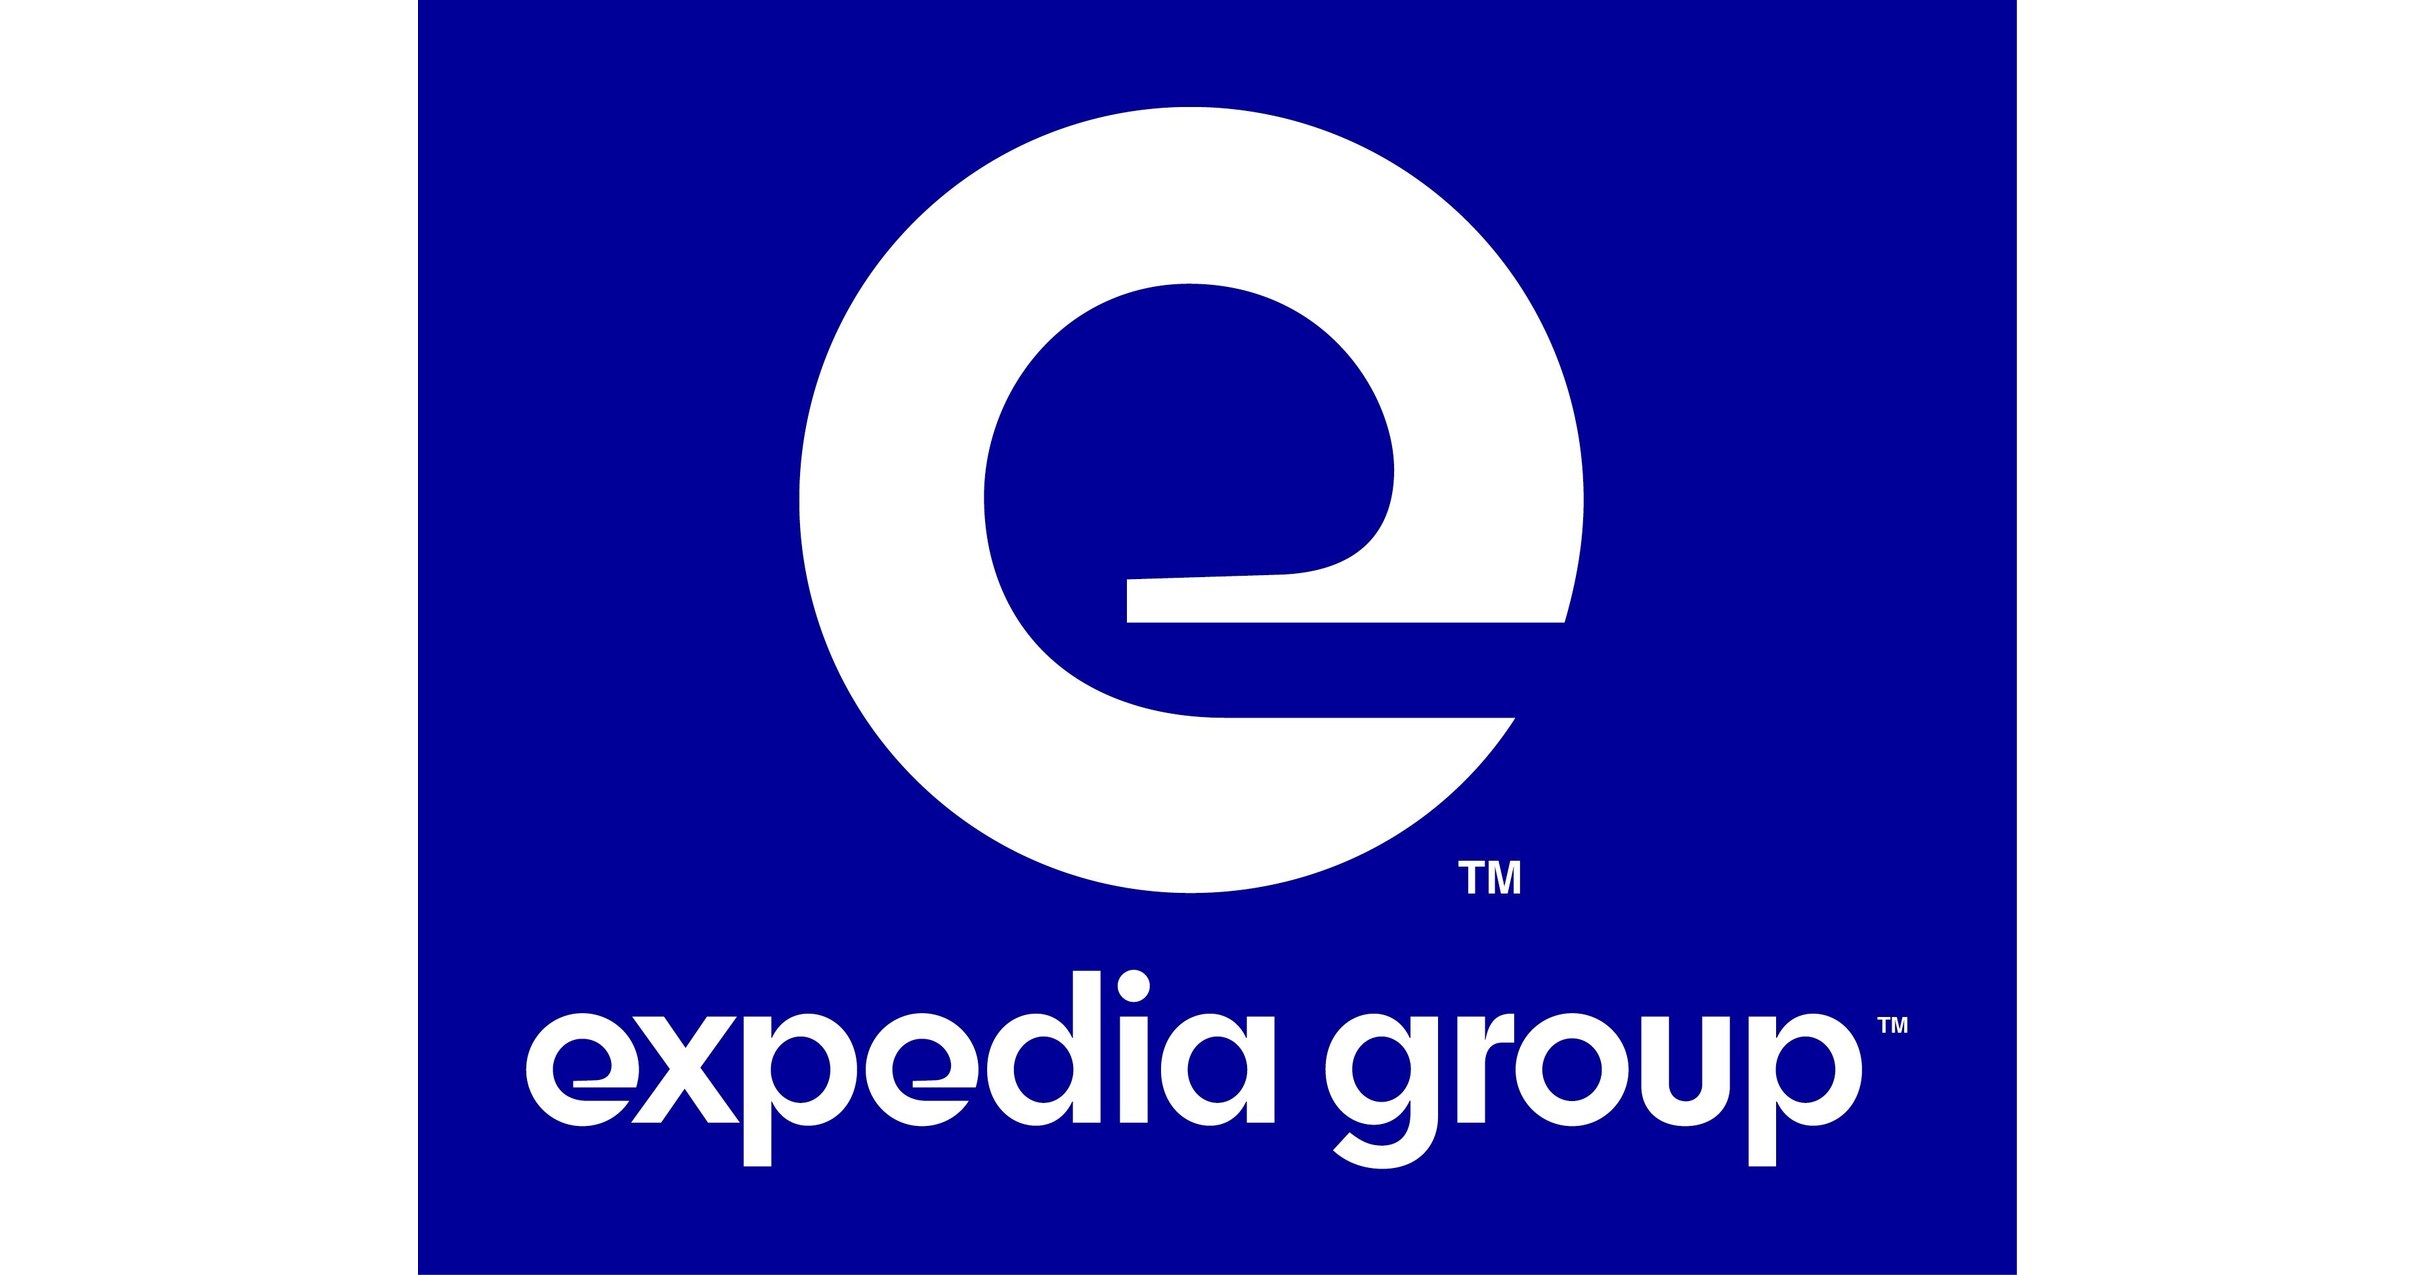 Research Shows Reducing Friction Matters; Expedia Group Prioritizes for